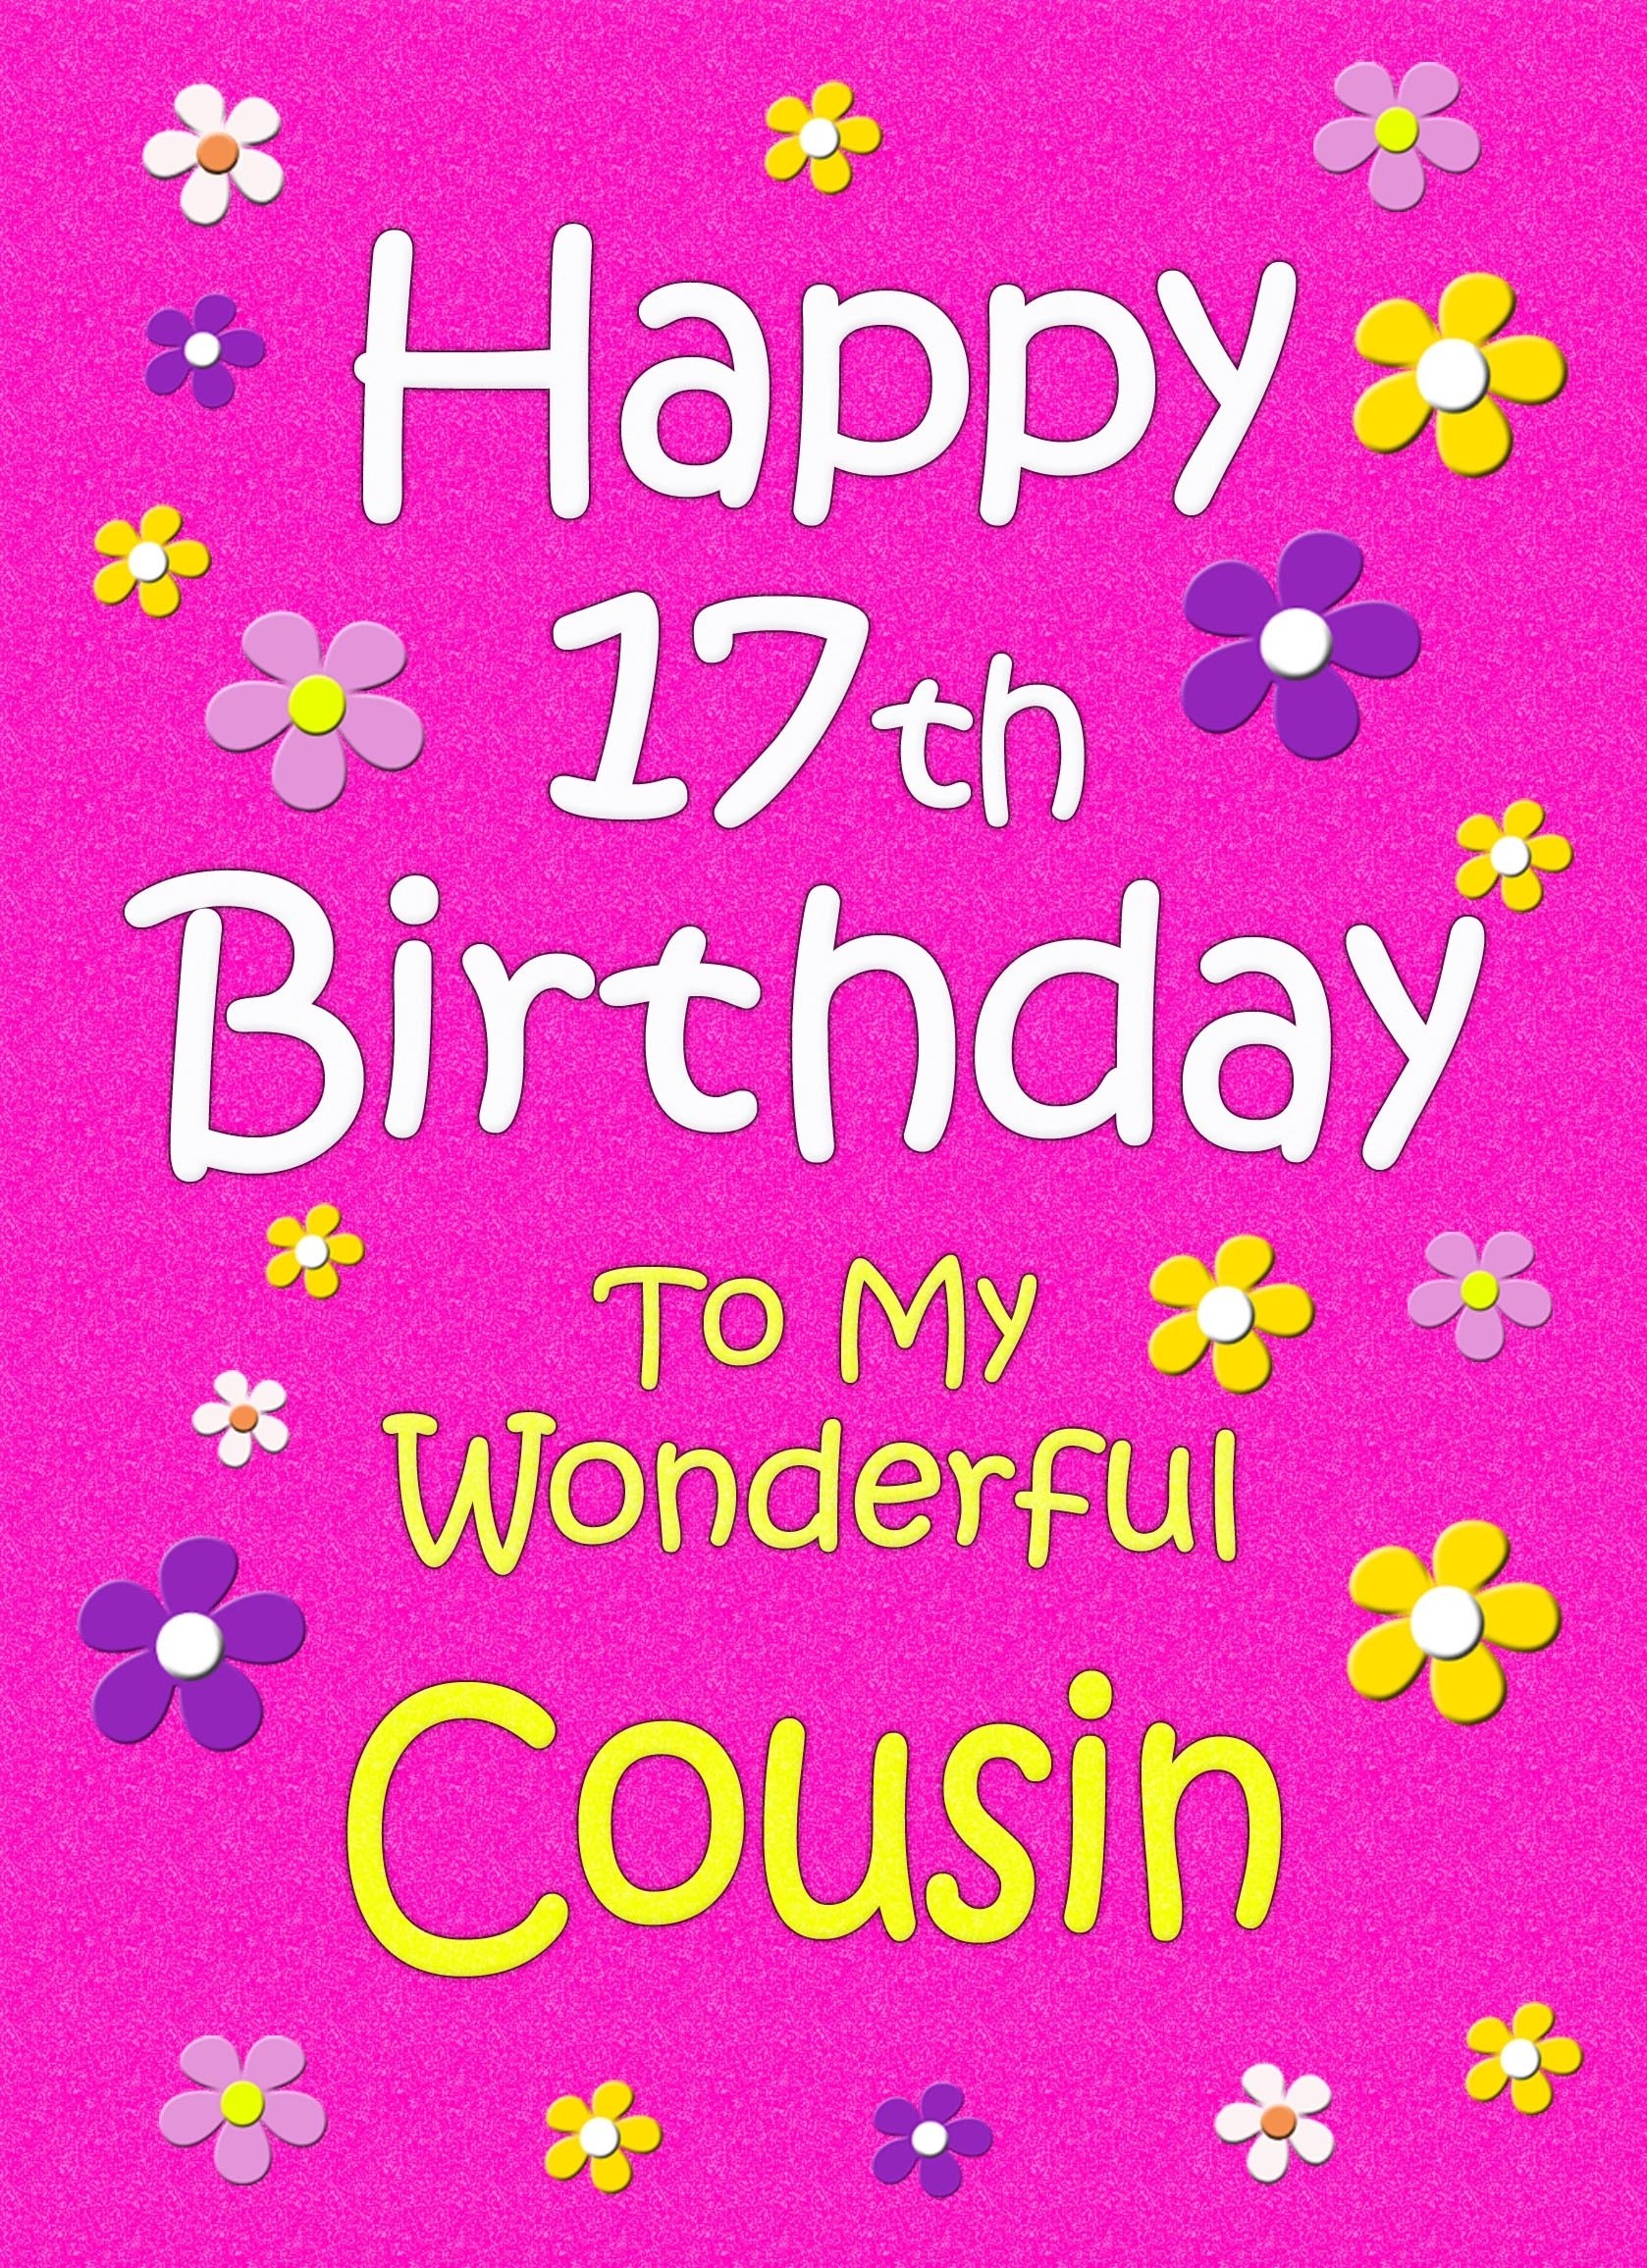 Cousin 17th Birthday Card (Pink)